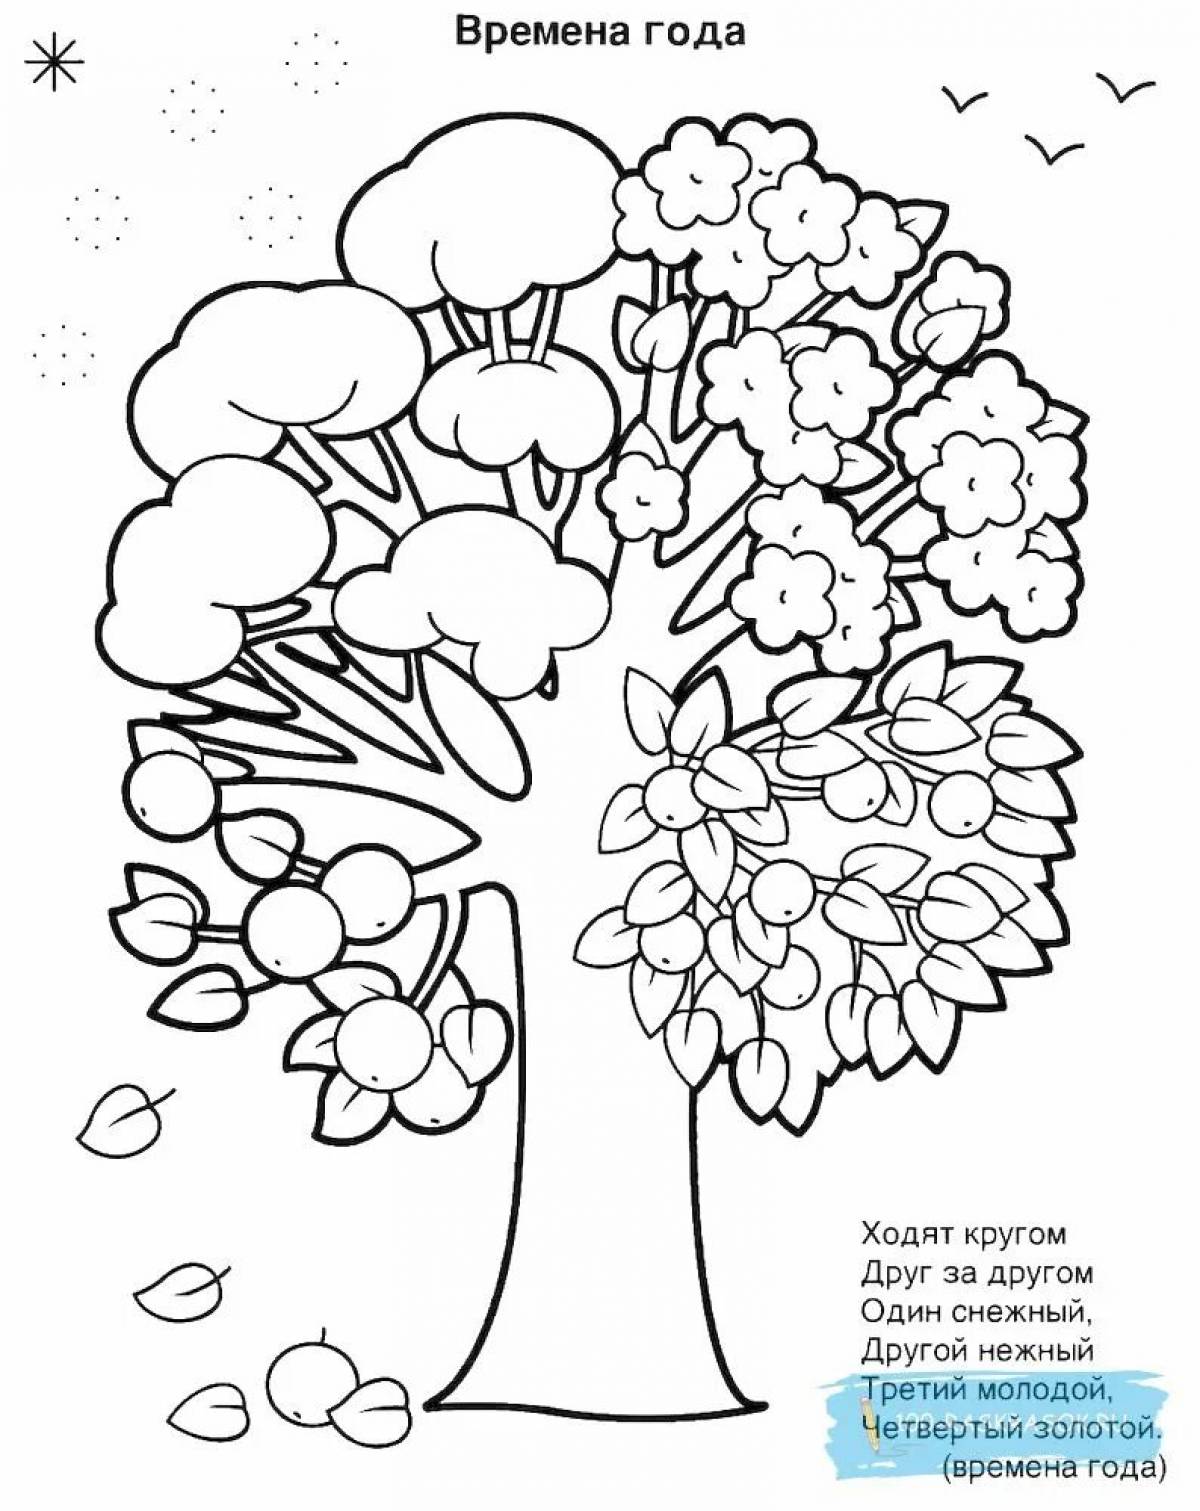 Great children's coloring pages